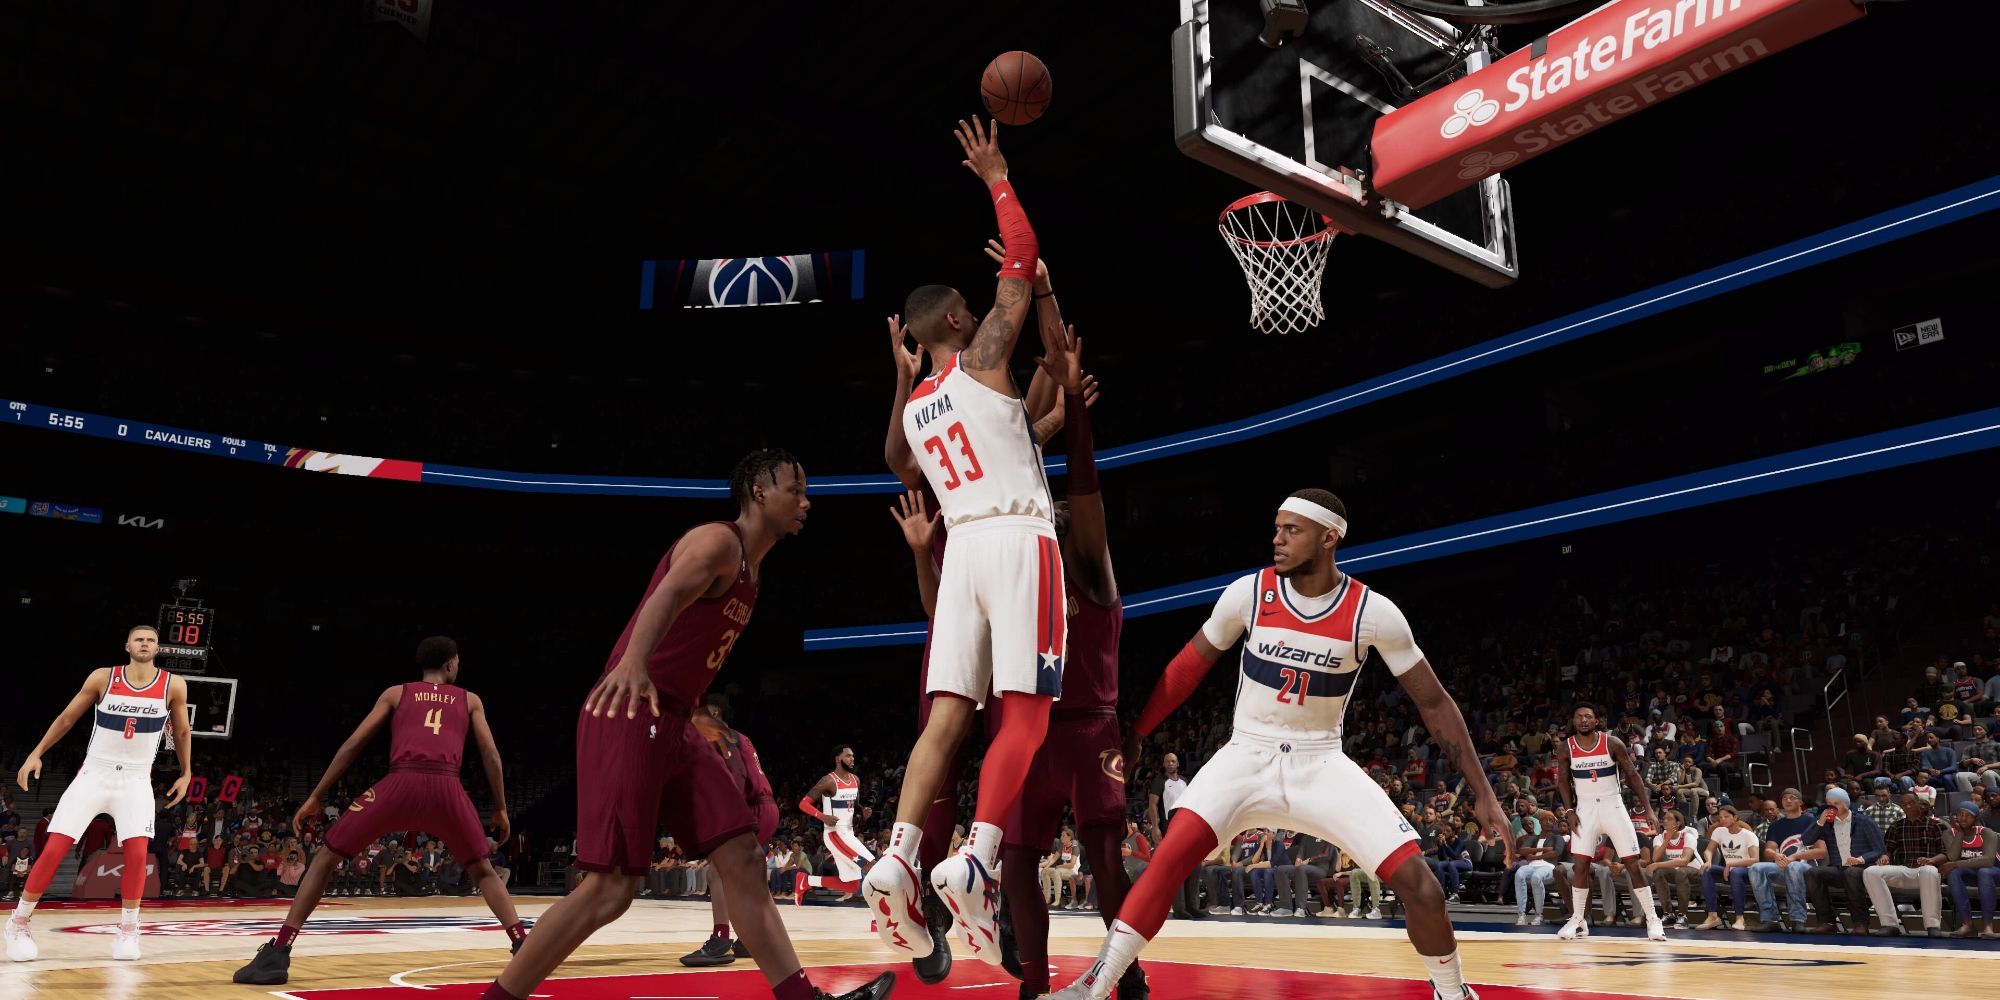 Kyle Kuzma of the Washington Wizards performing a lay-up in NBA 2K23